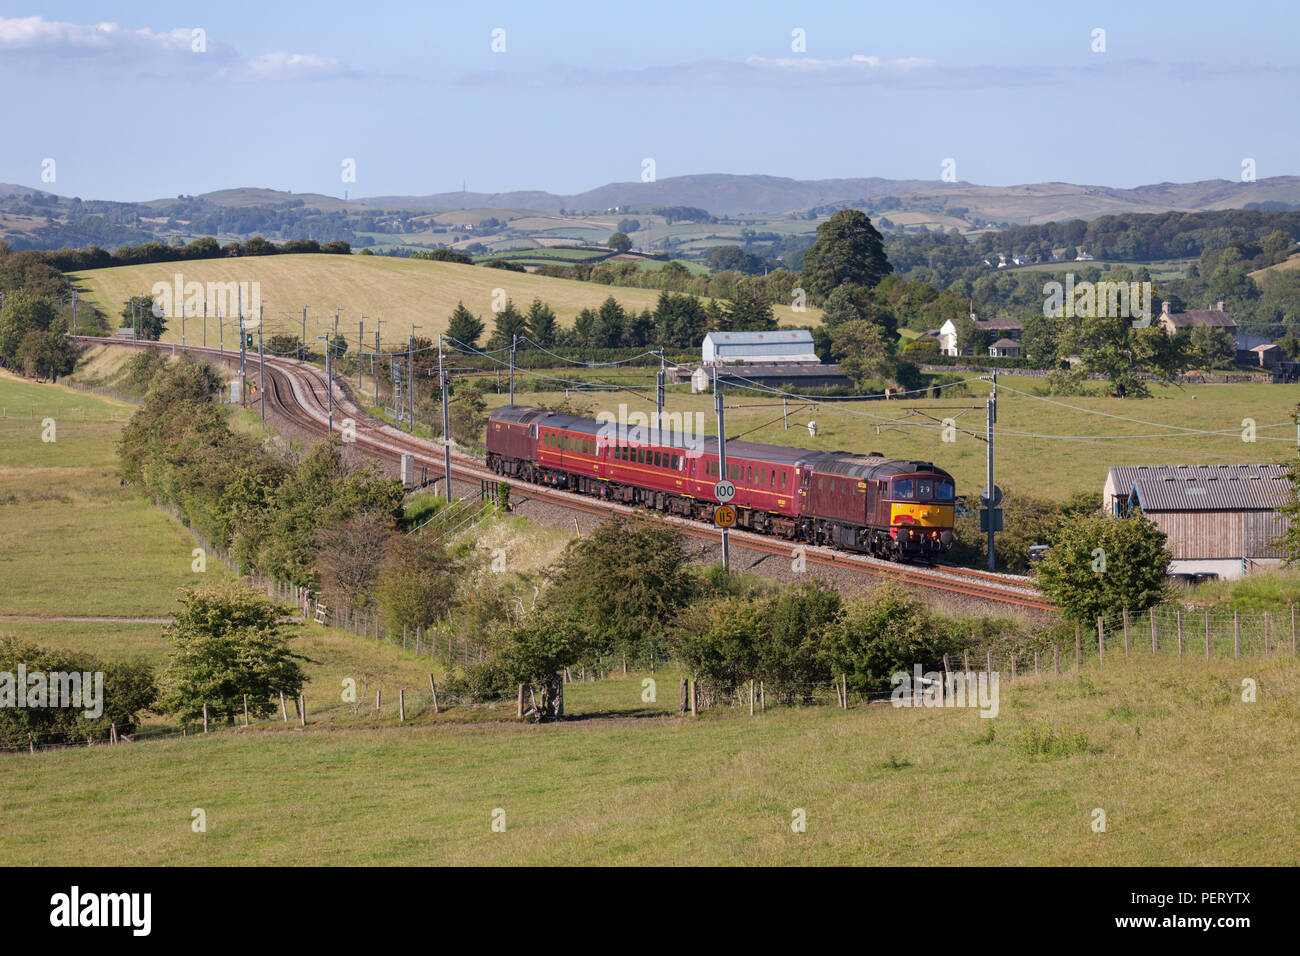 A West coast Railways class 33 locomotive on the west coast main line with empty carriages that had been running the windermere branch line trains Stock Photo